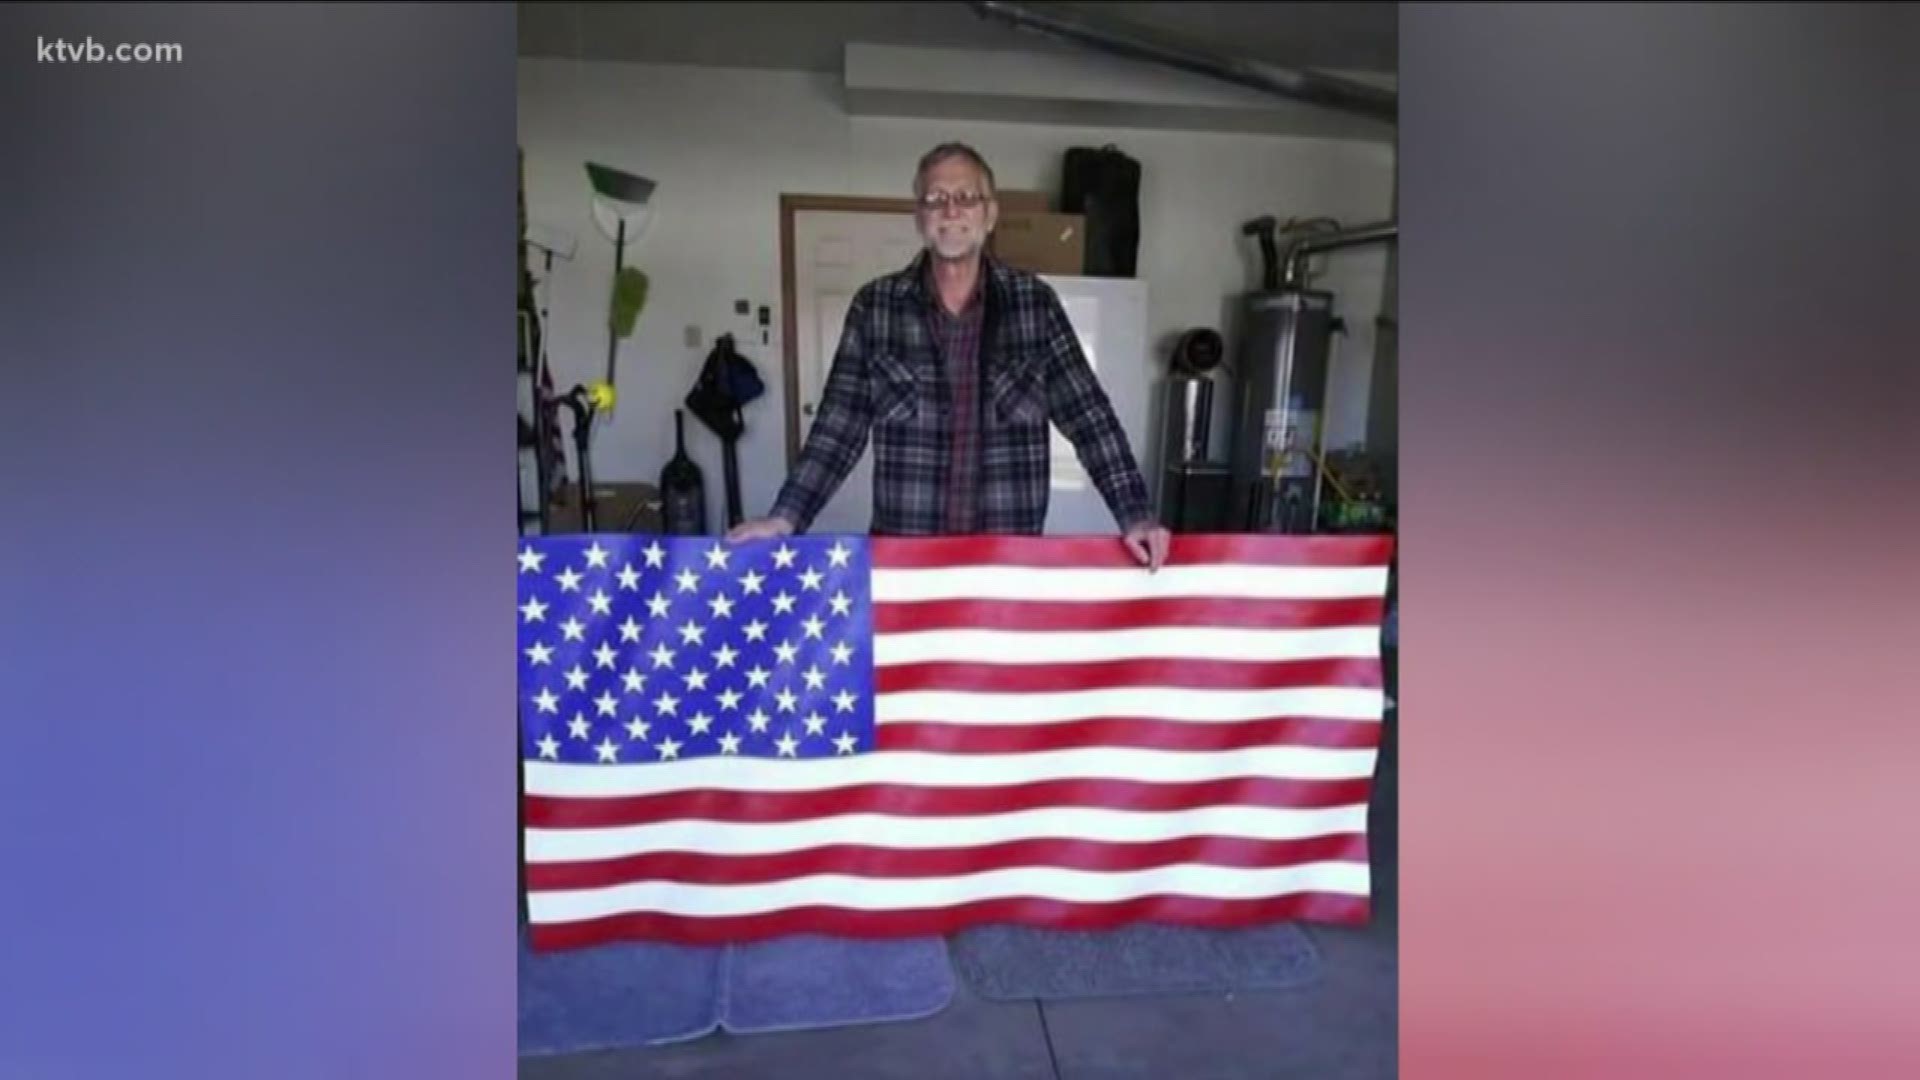 David Kelcher is a disabled Air Force veteran who loves God, our country and loves living in Idaho. He says “it’s like people get paid to smile here!”